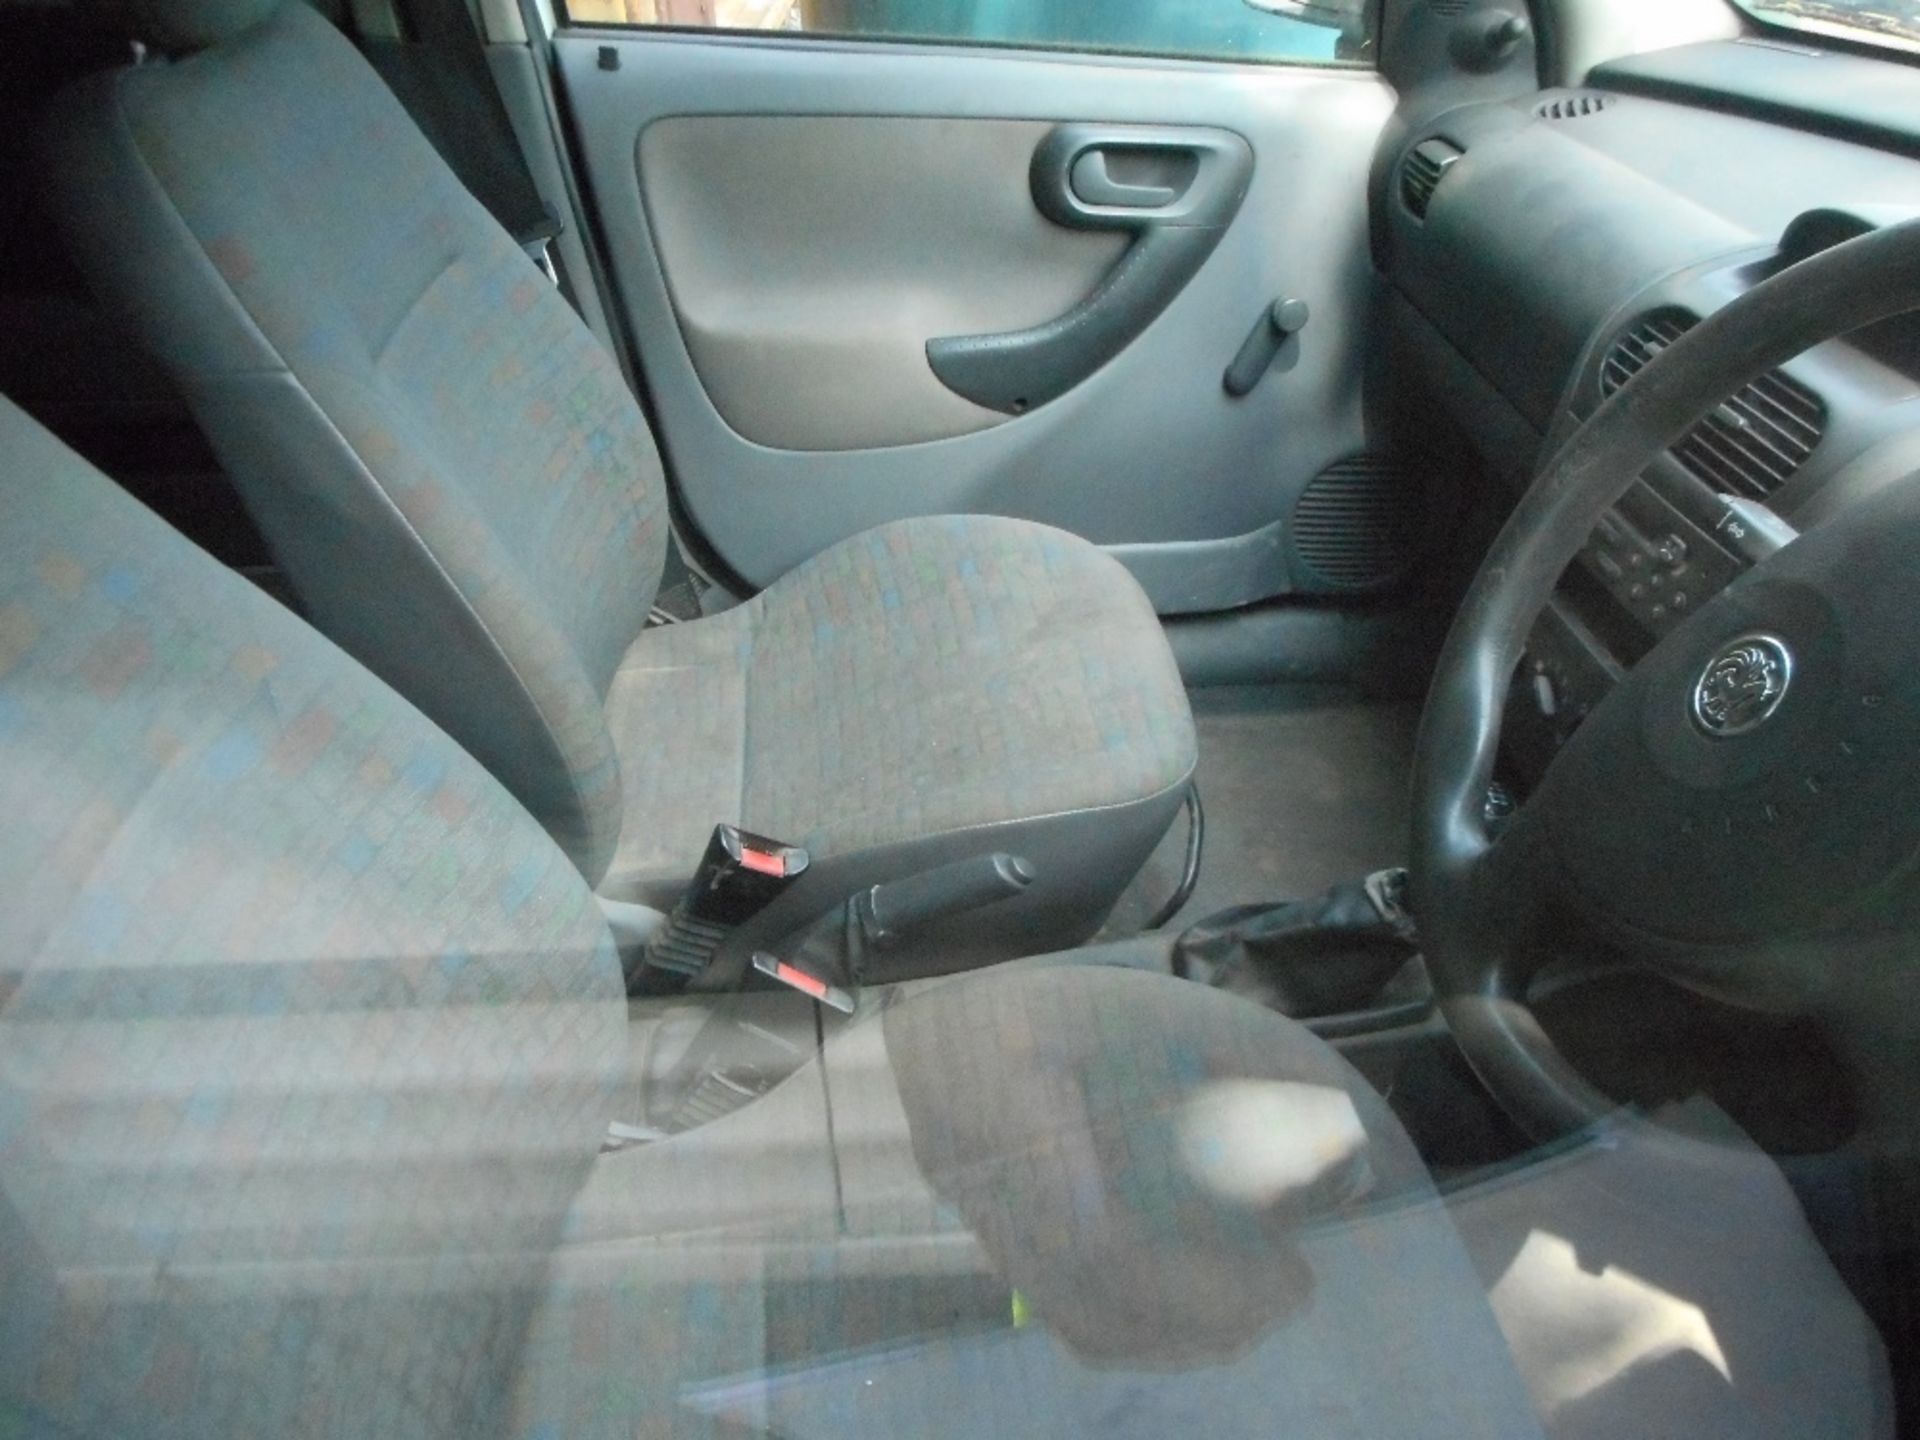 Vauxhall Combo crew van with extra row of seats white year 2004 - Image 6 of 9